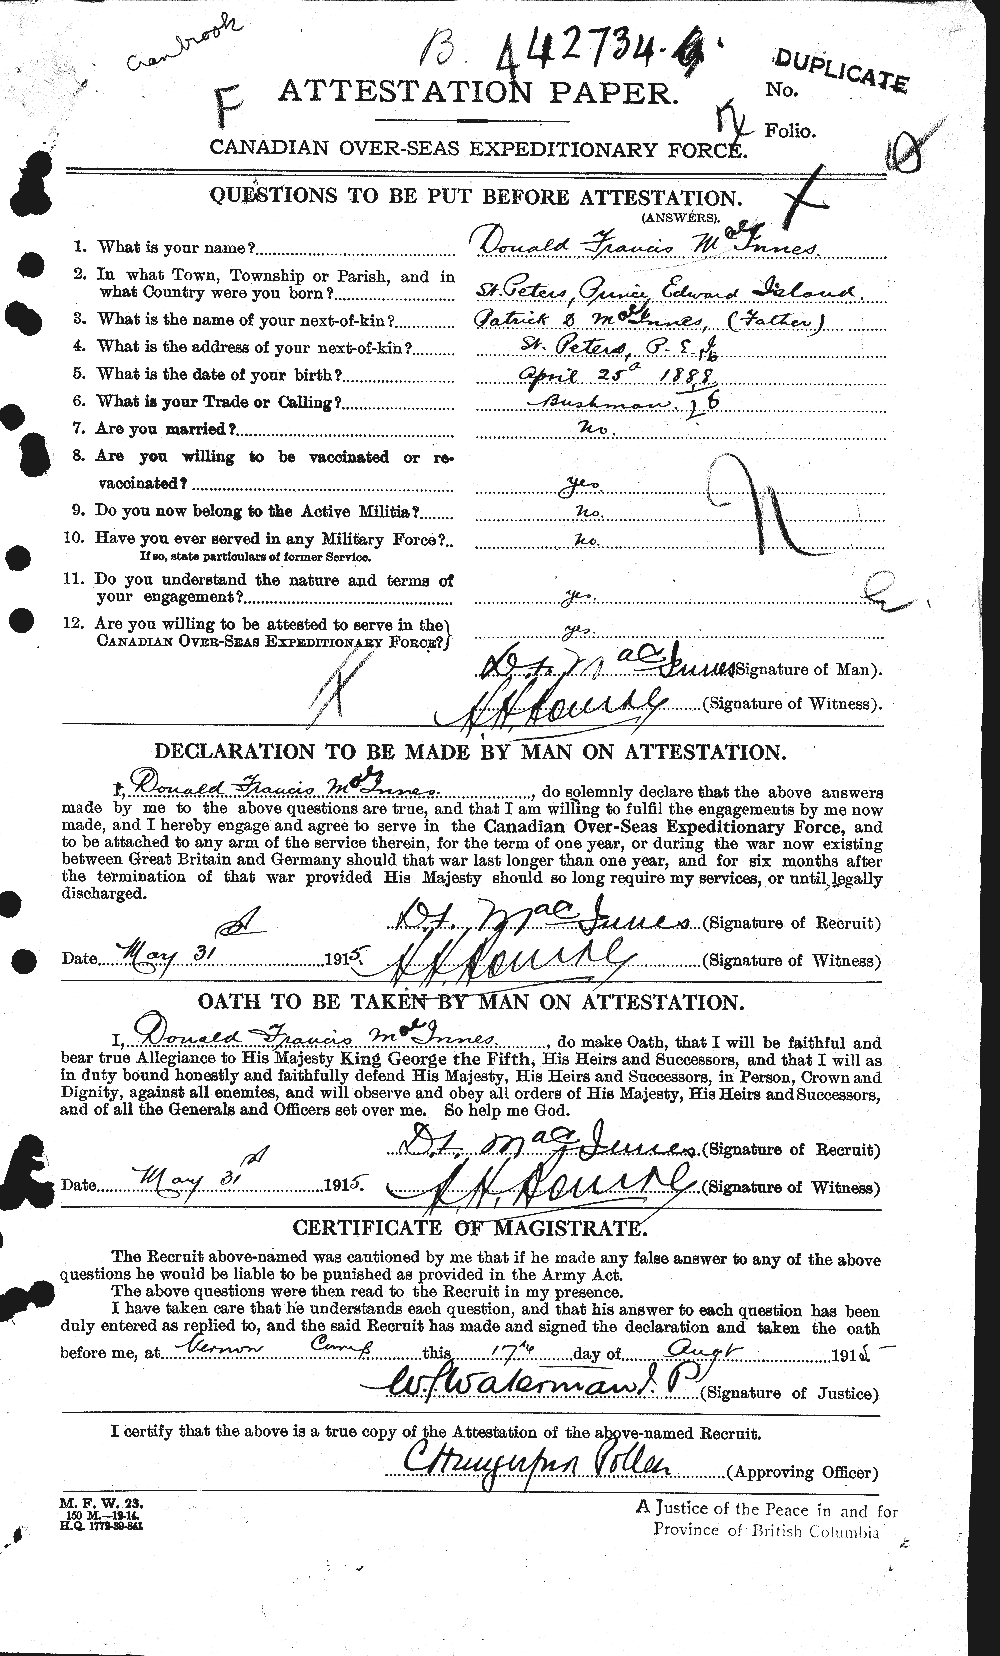 Personnel Records of the First World War - CEF 526633a